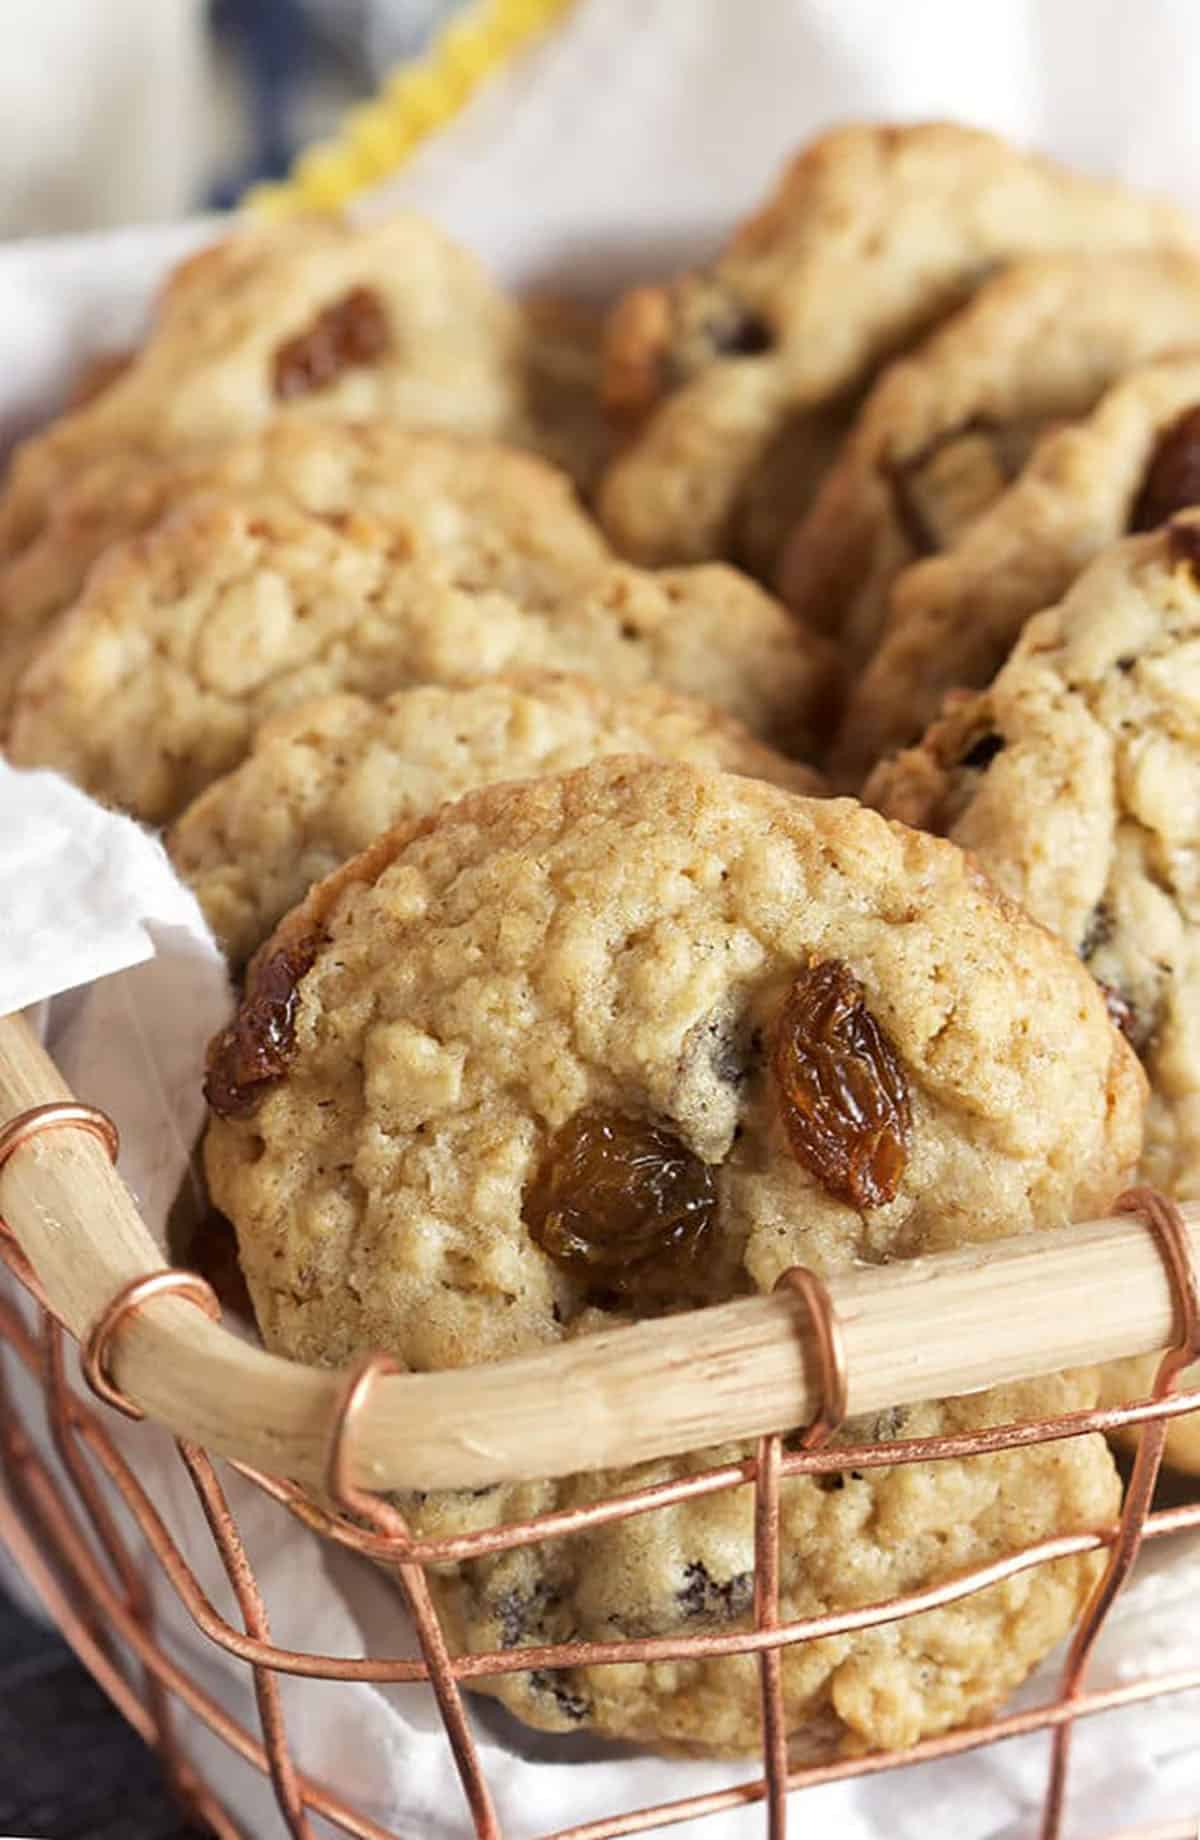 Oatmeal raisin cookies arranged in a basket lined with a white linen.